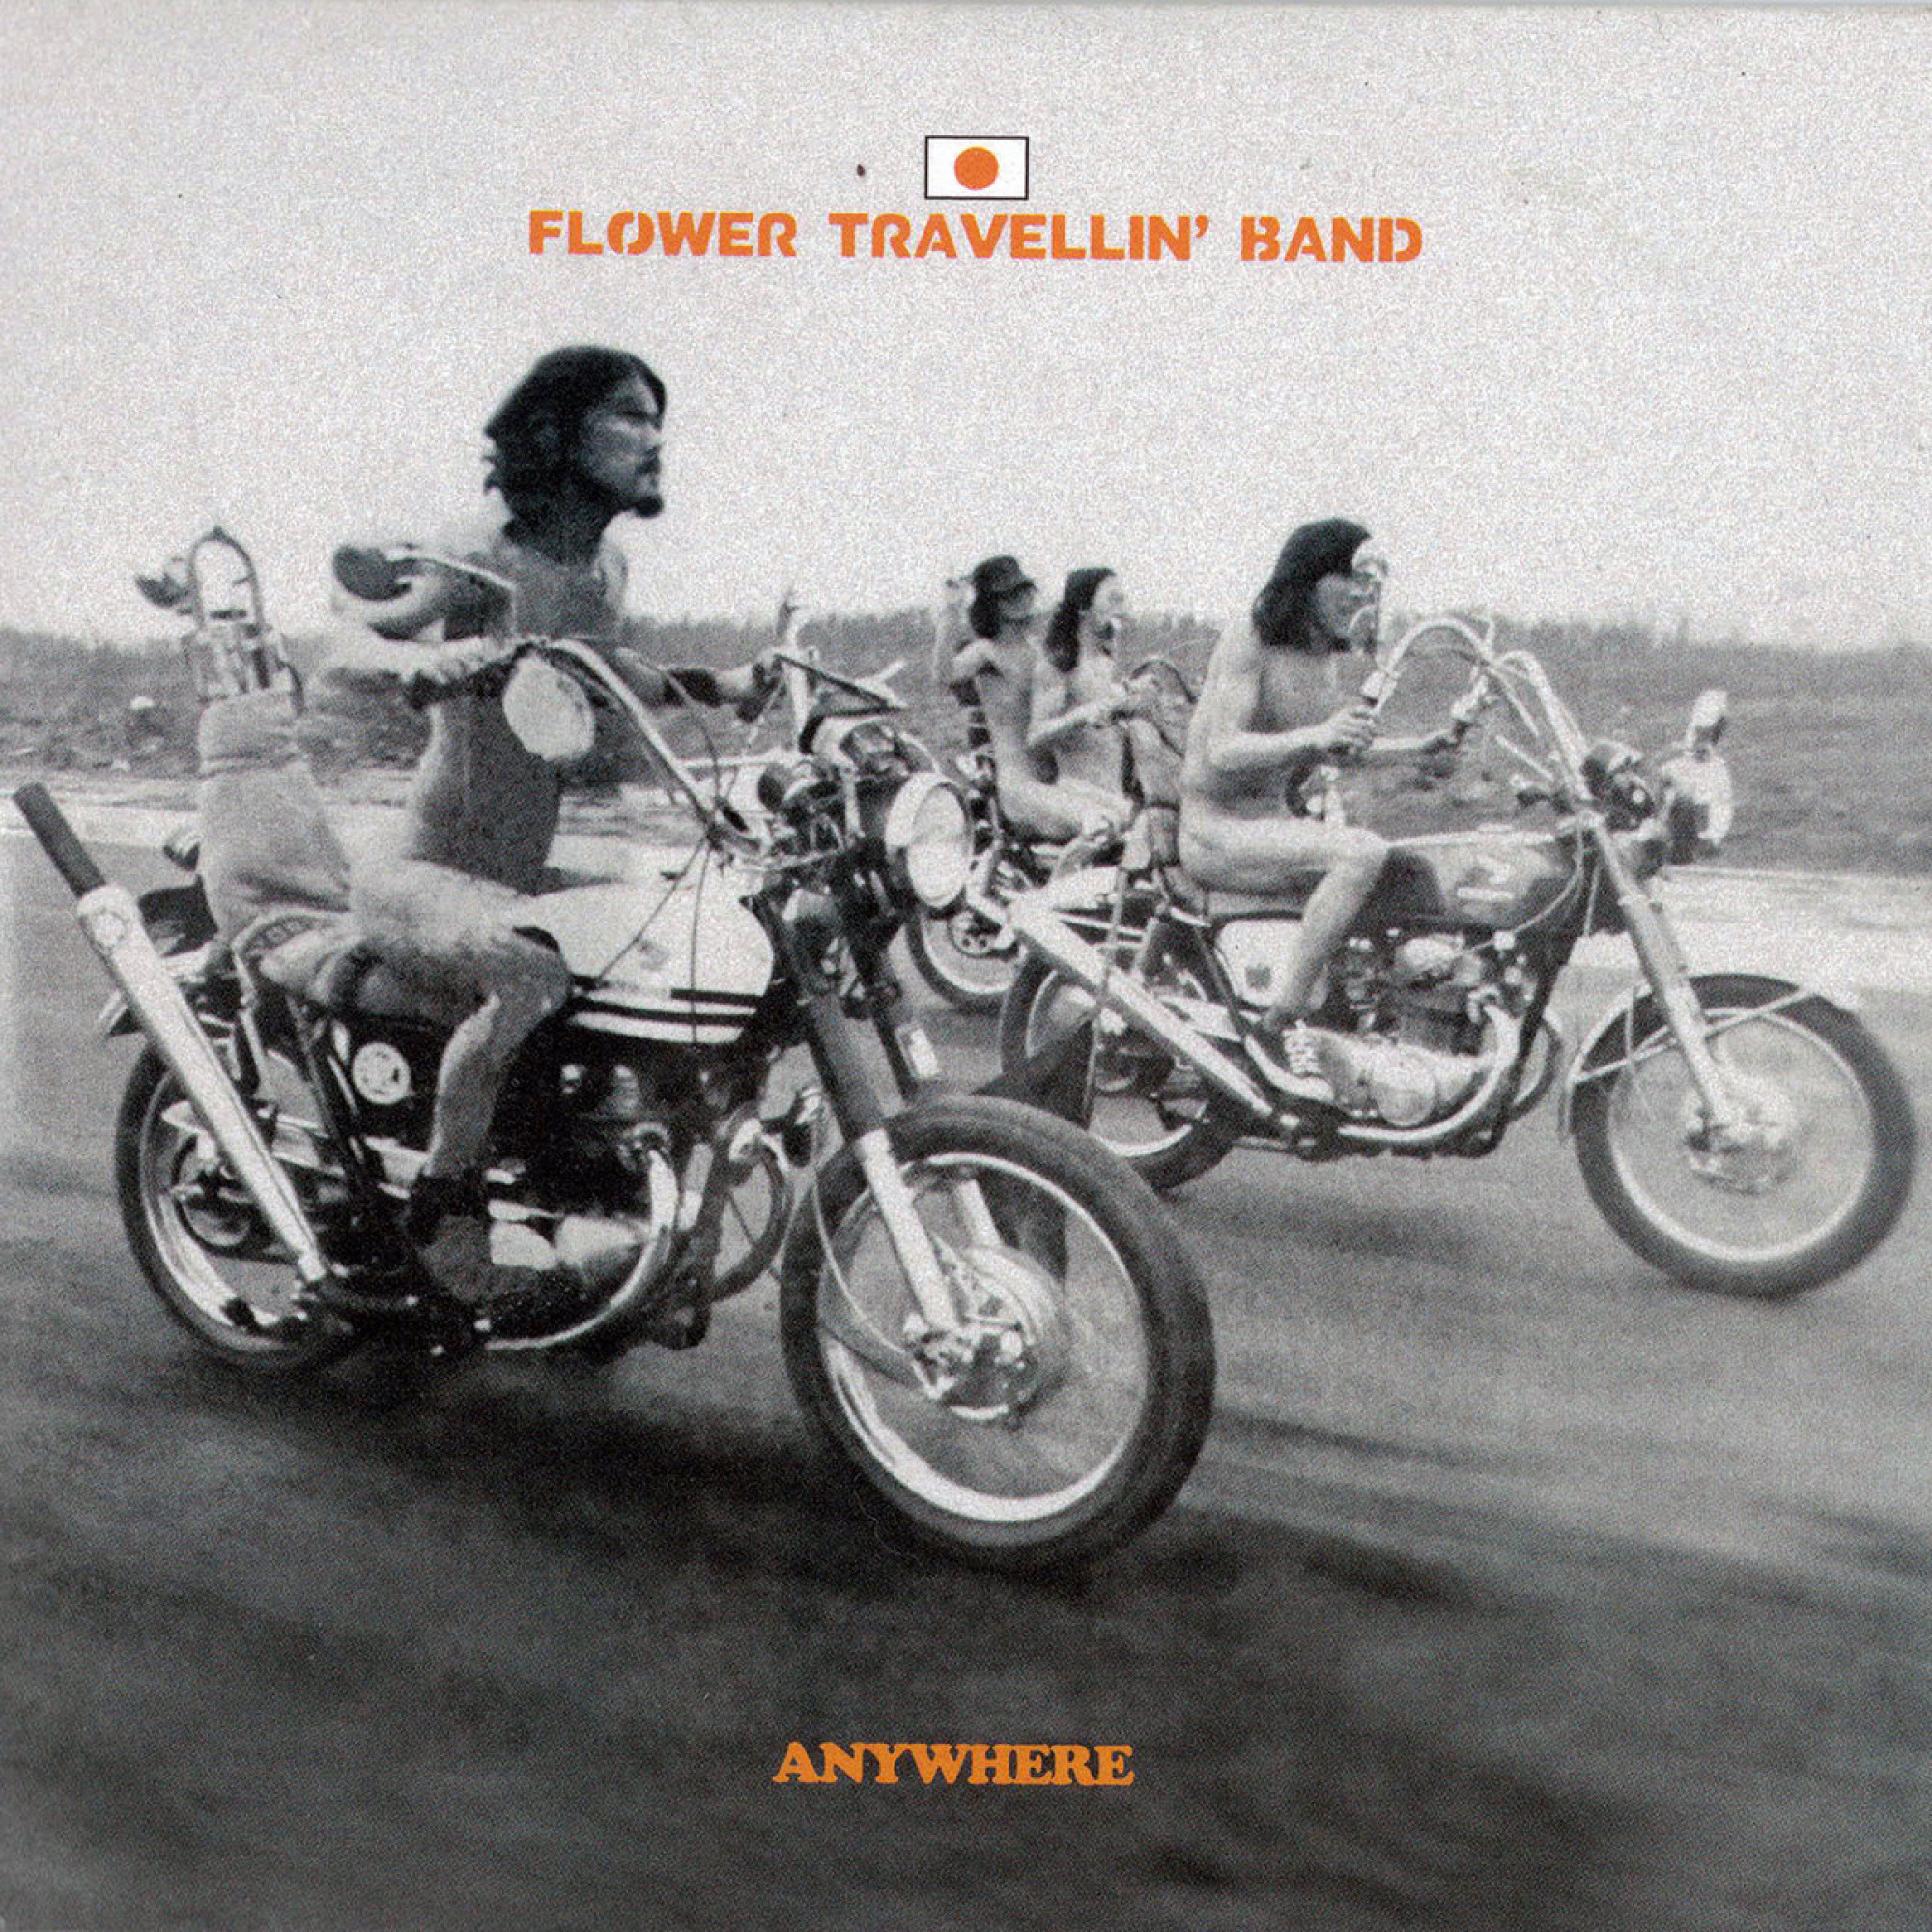 Flower Travellin' Band - Anywhere — buy vinyl records and 